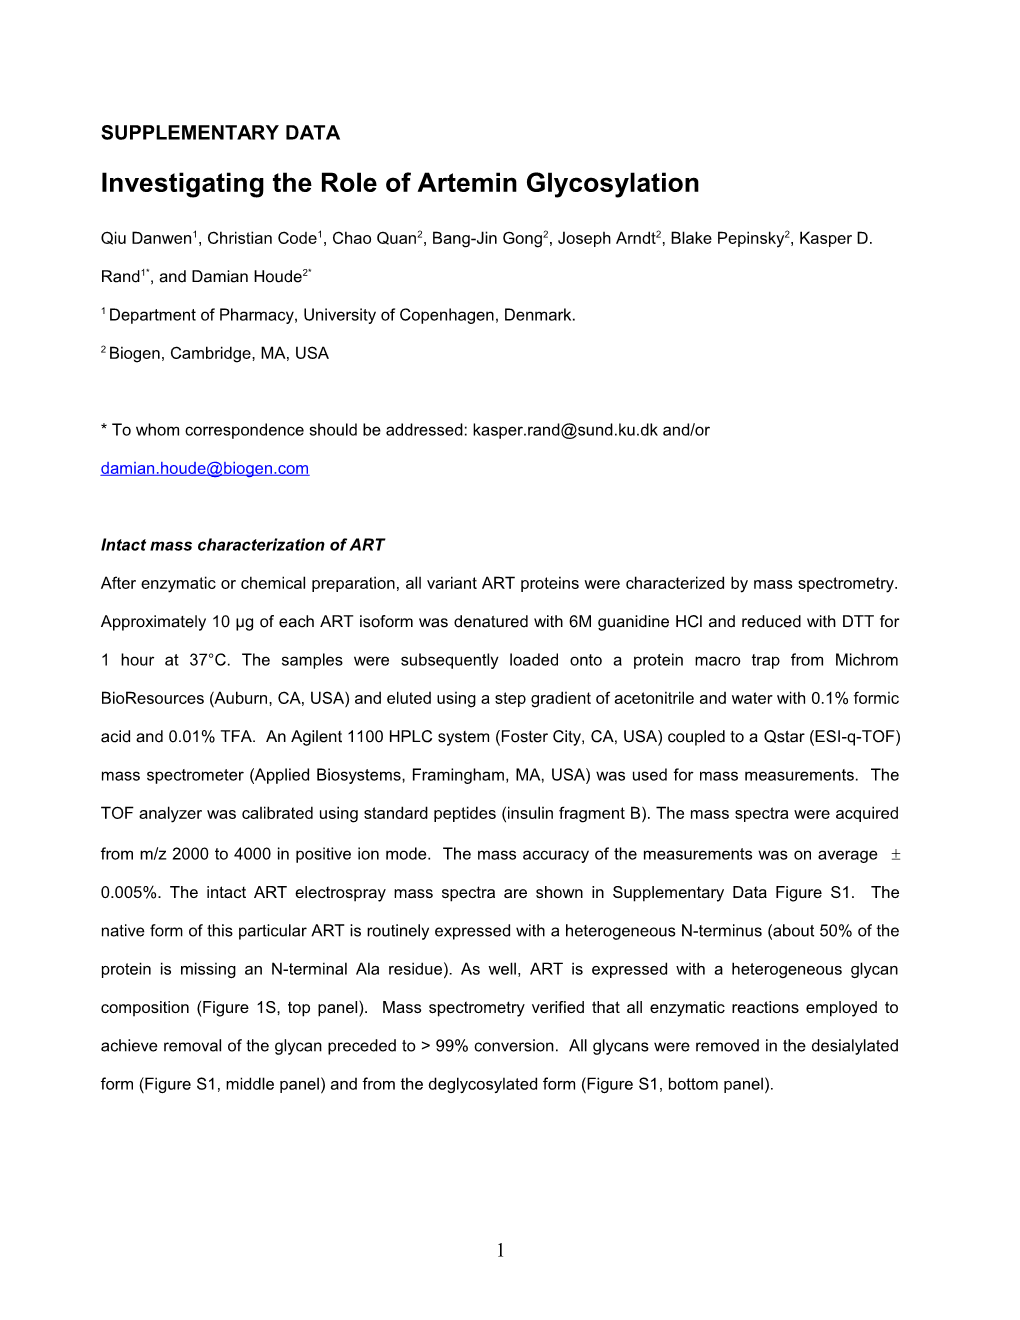 Investigating the Role of Artemin Glycosylation